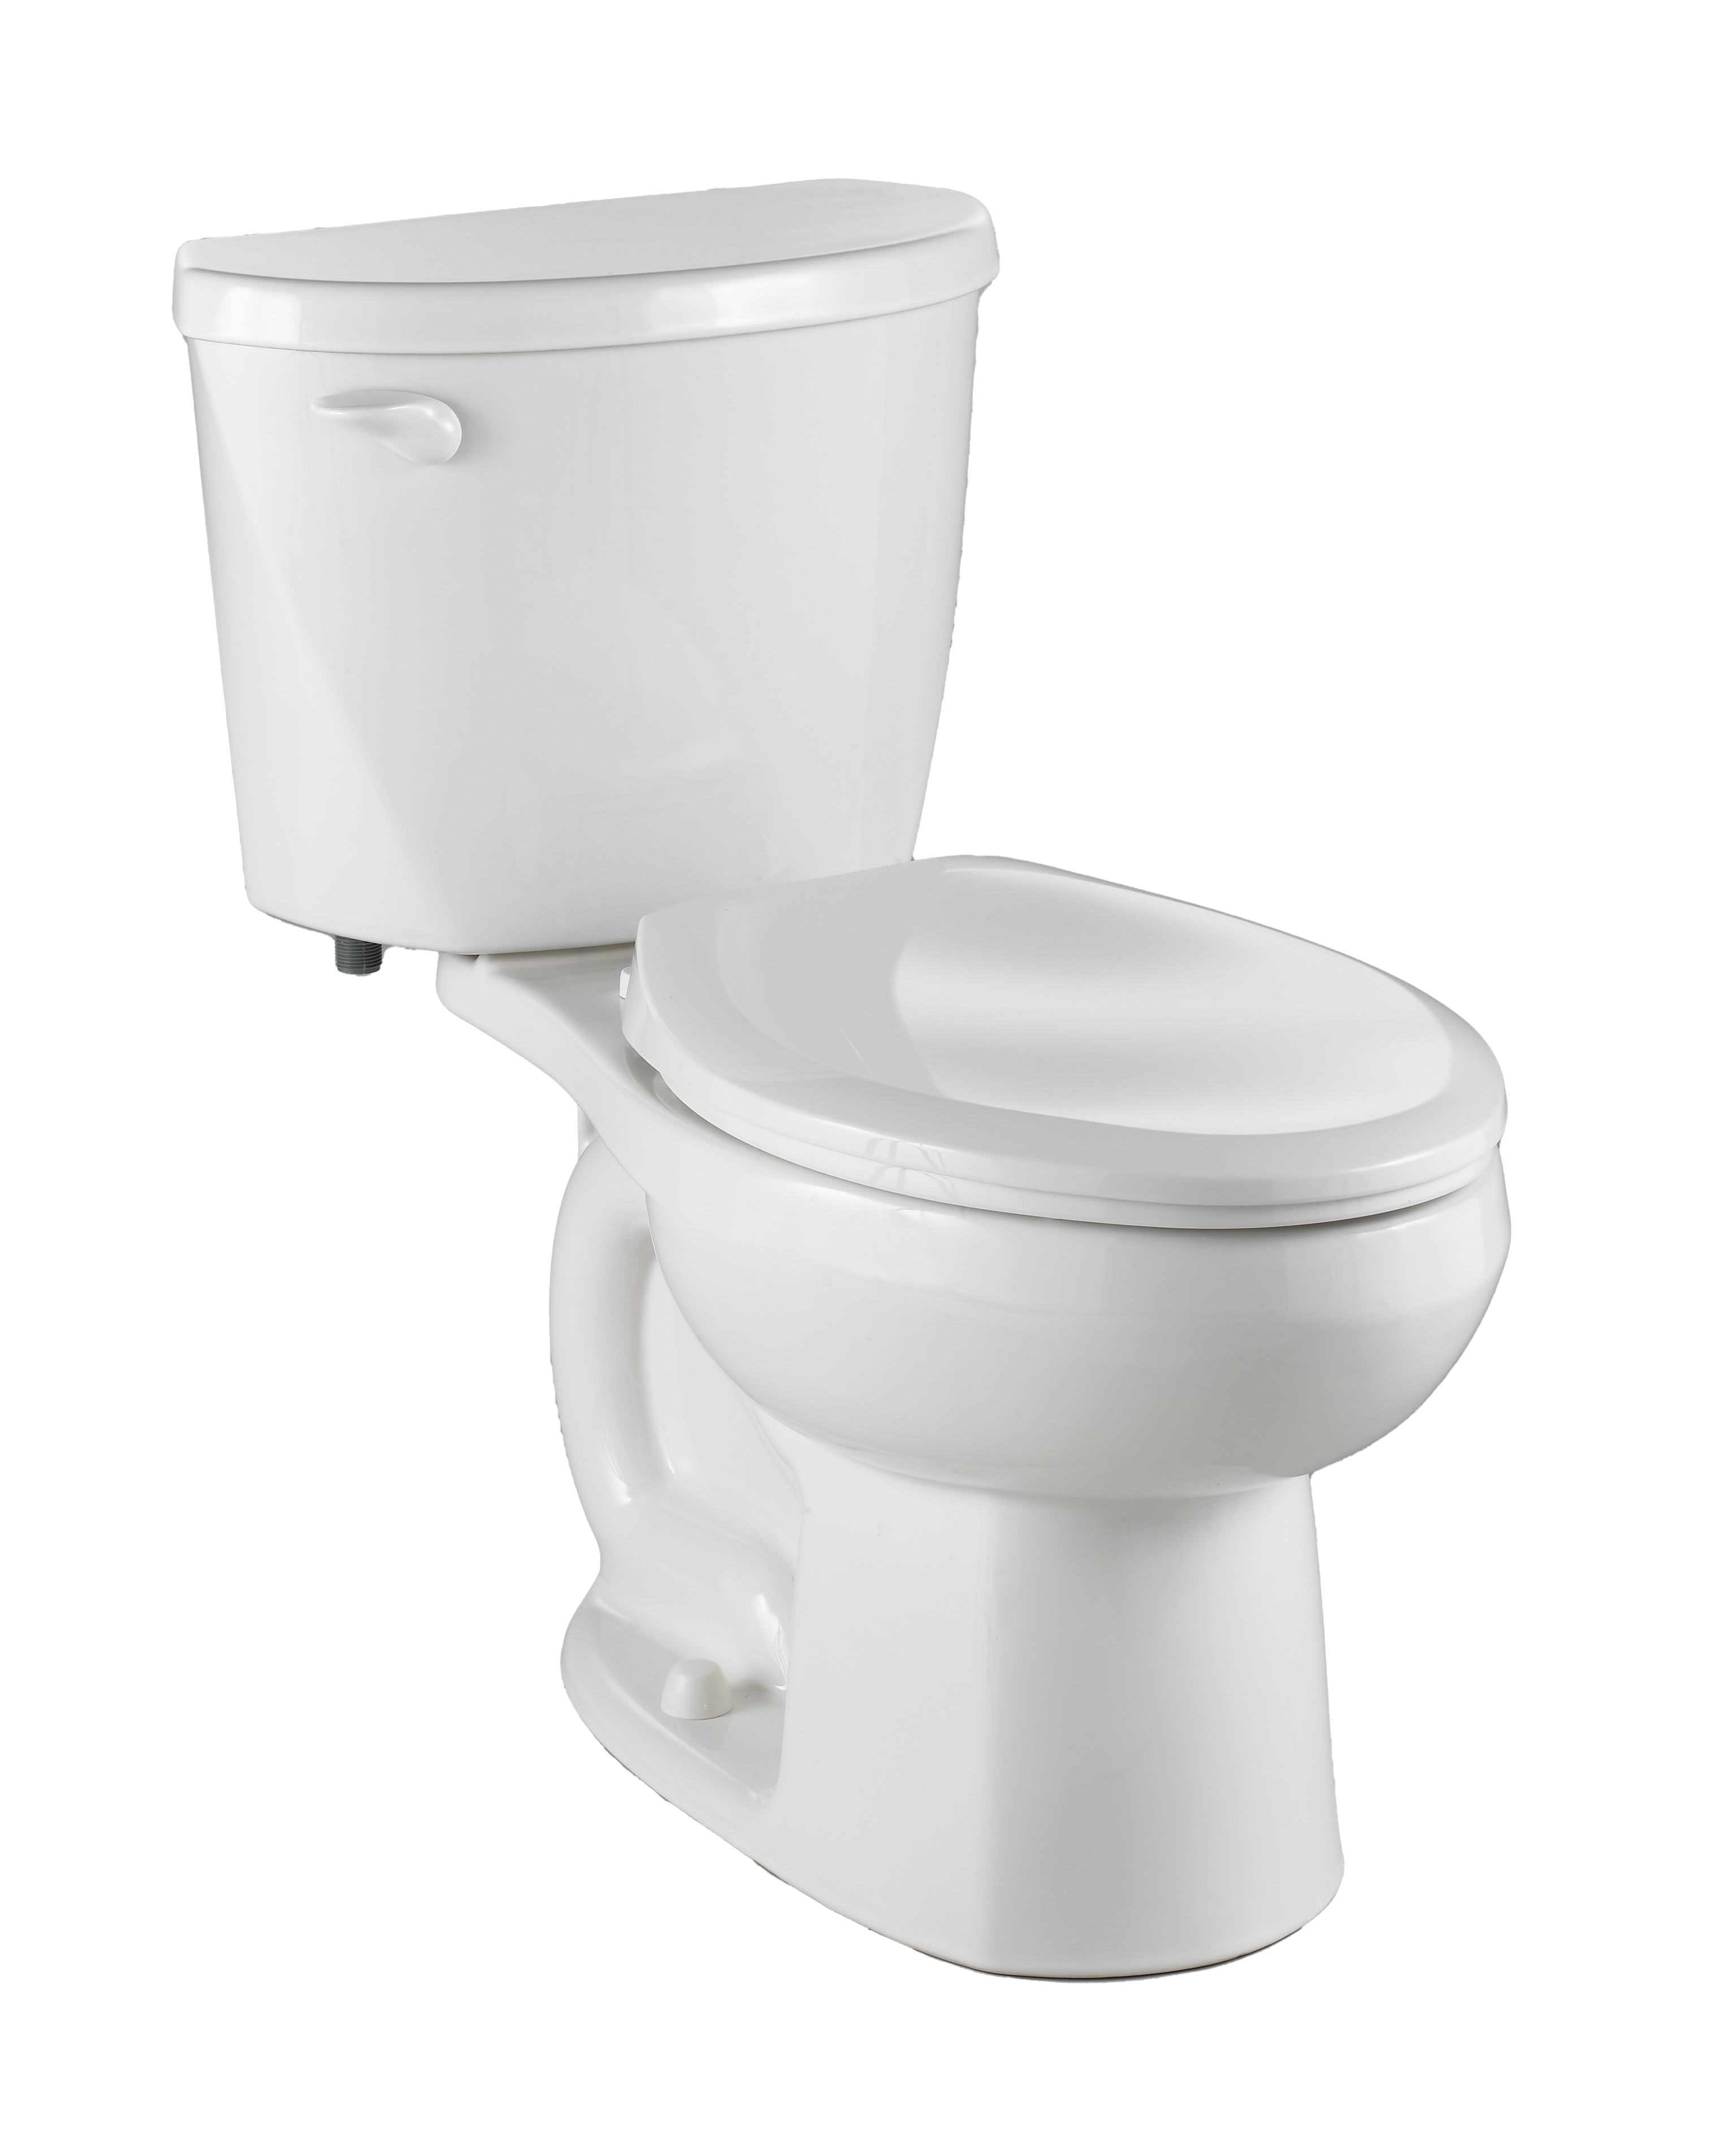 Evolution 2 Two-Piece 1.6 gpf/6.0 Lpf Standard Height Elongated Toilet Less Seat with Lined Tank